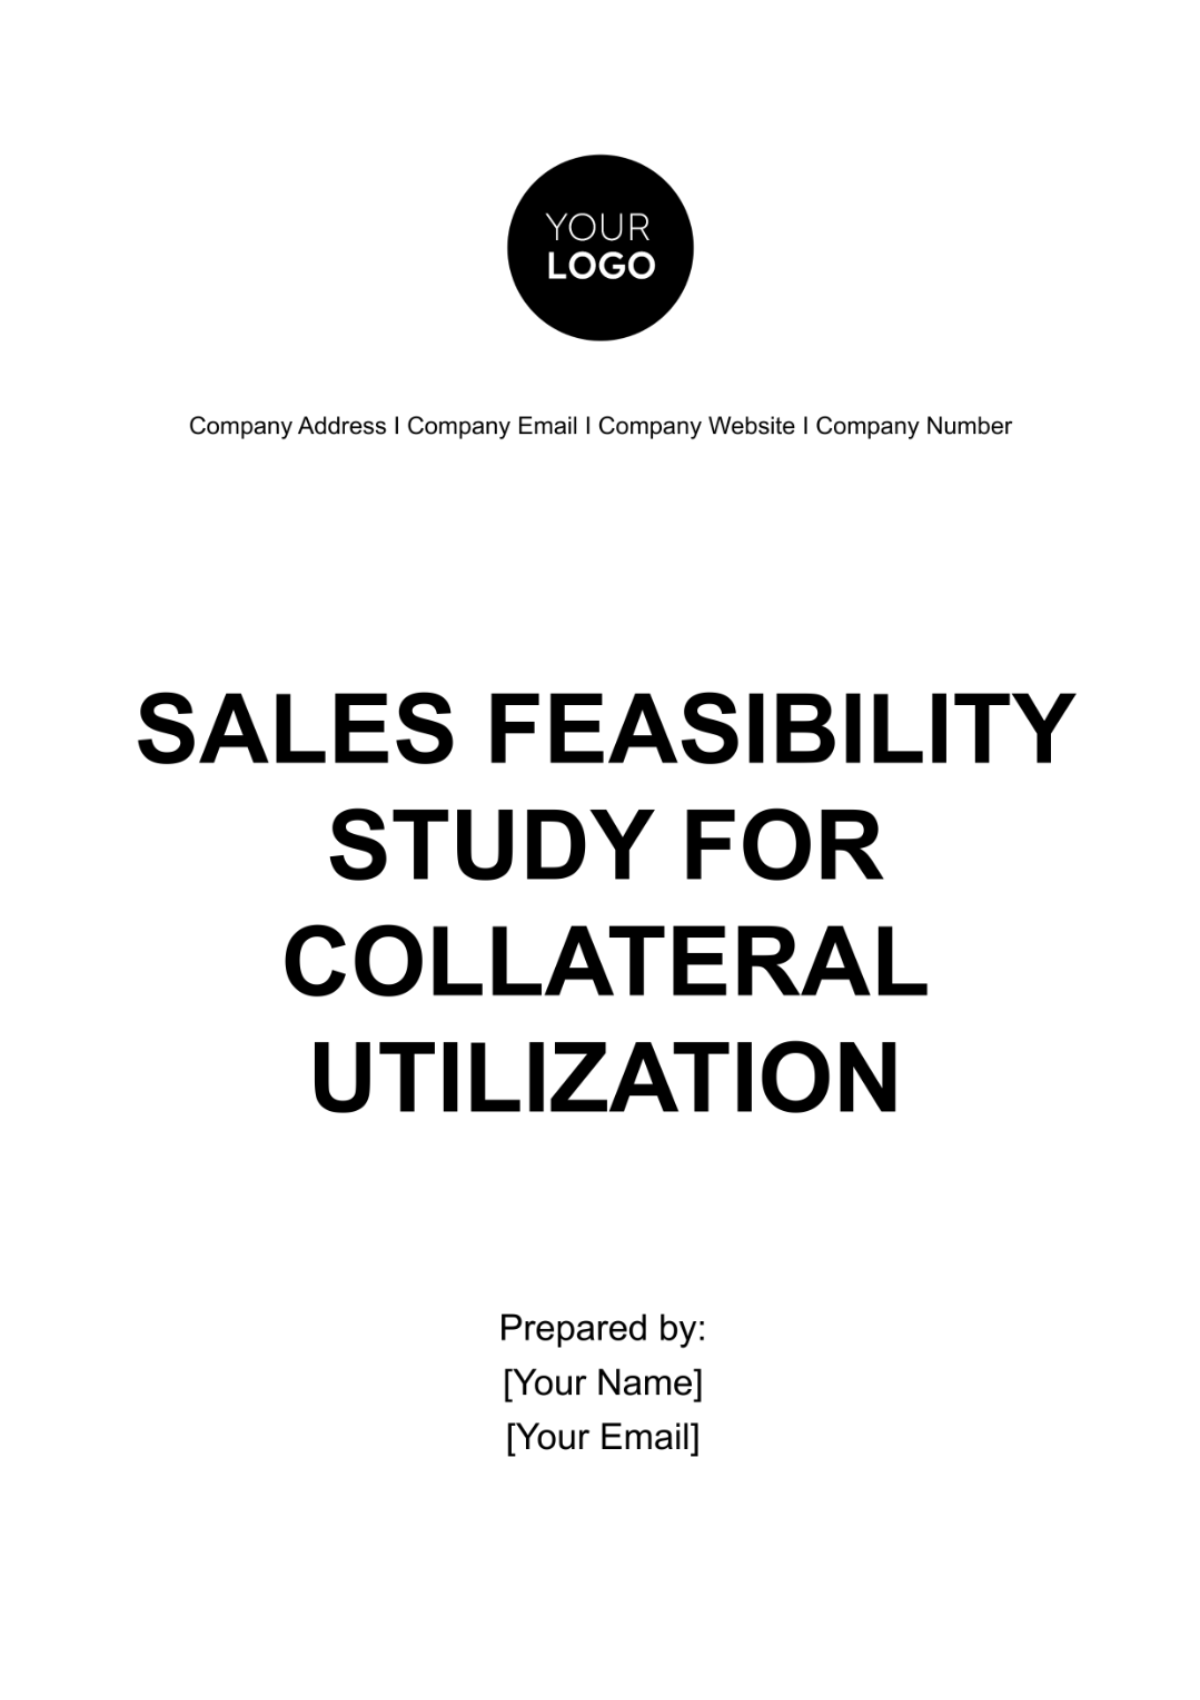 Sales Feasibility Study for Collateral Utilization Template